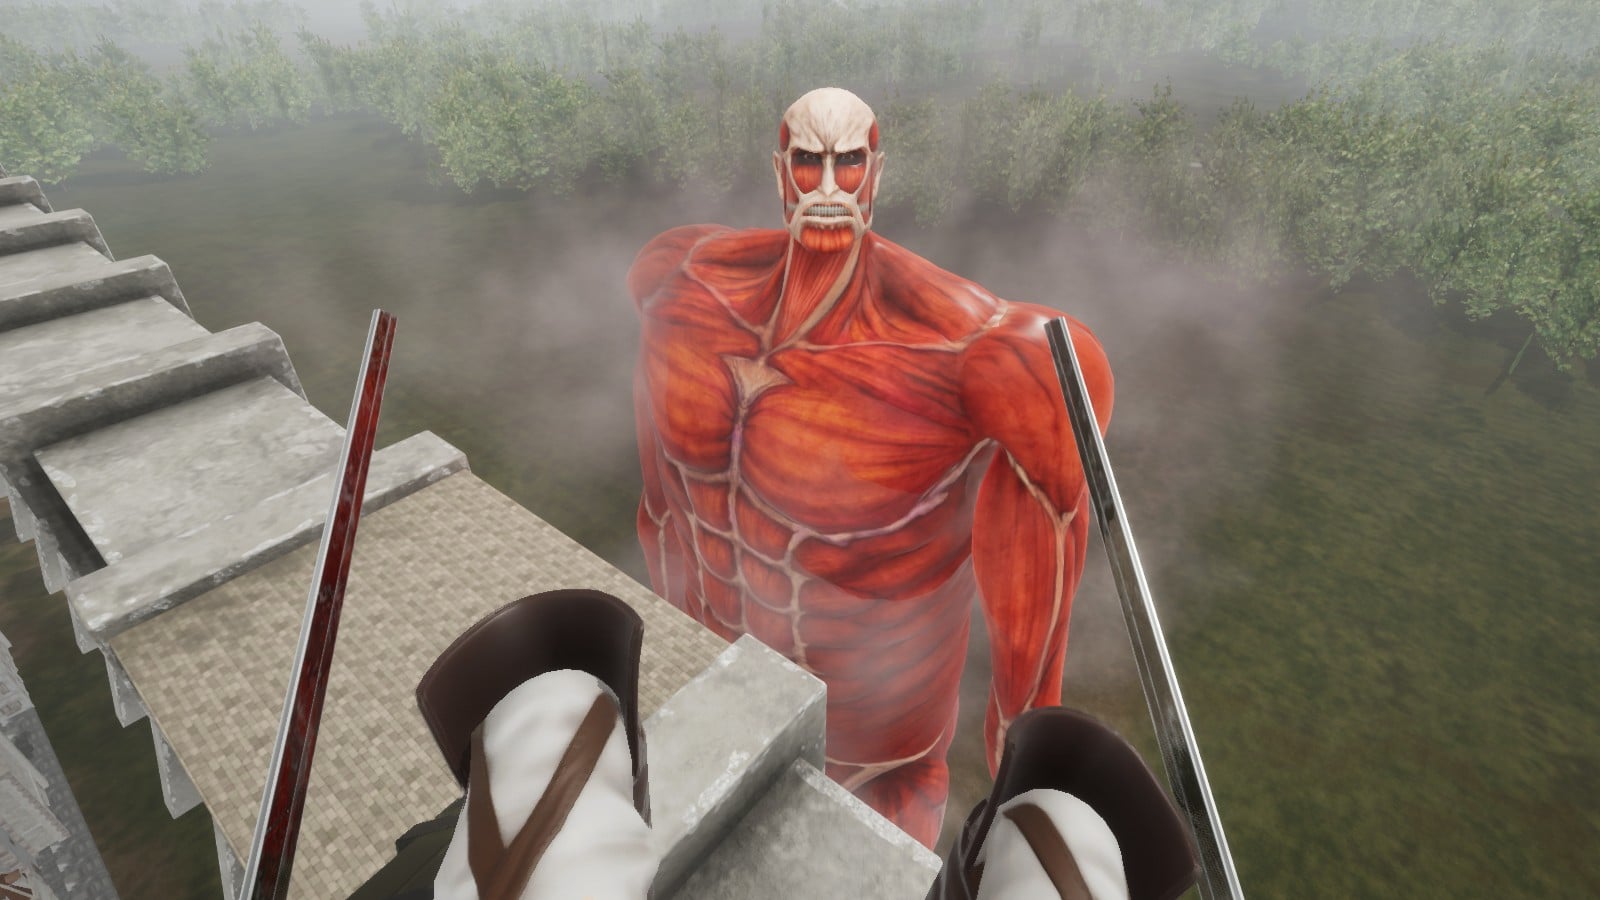 This Attack on Titan Fan Game is INSANE - Attack on Titan Tribute Game 